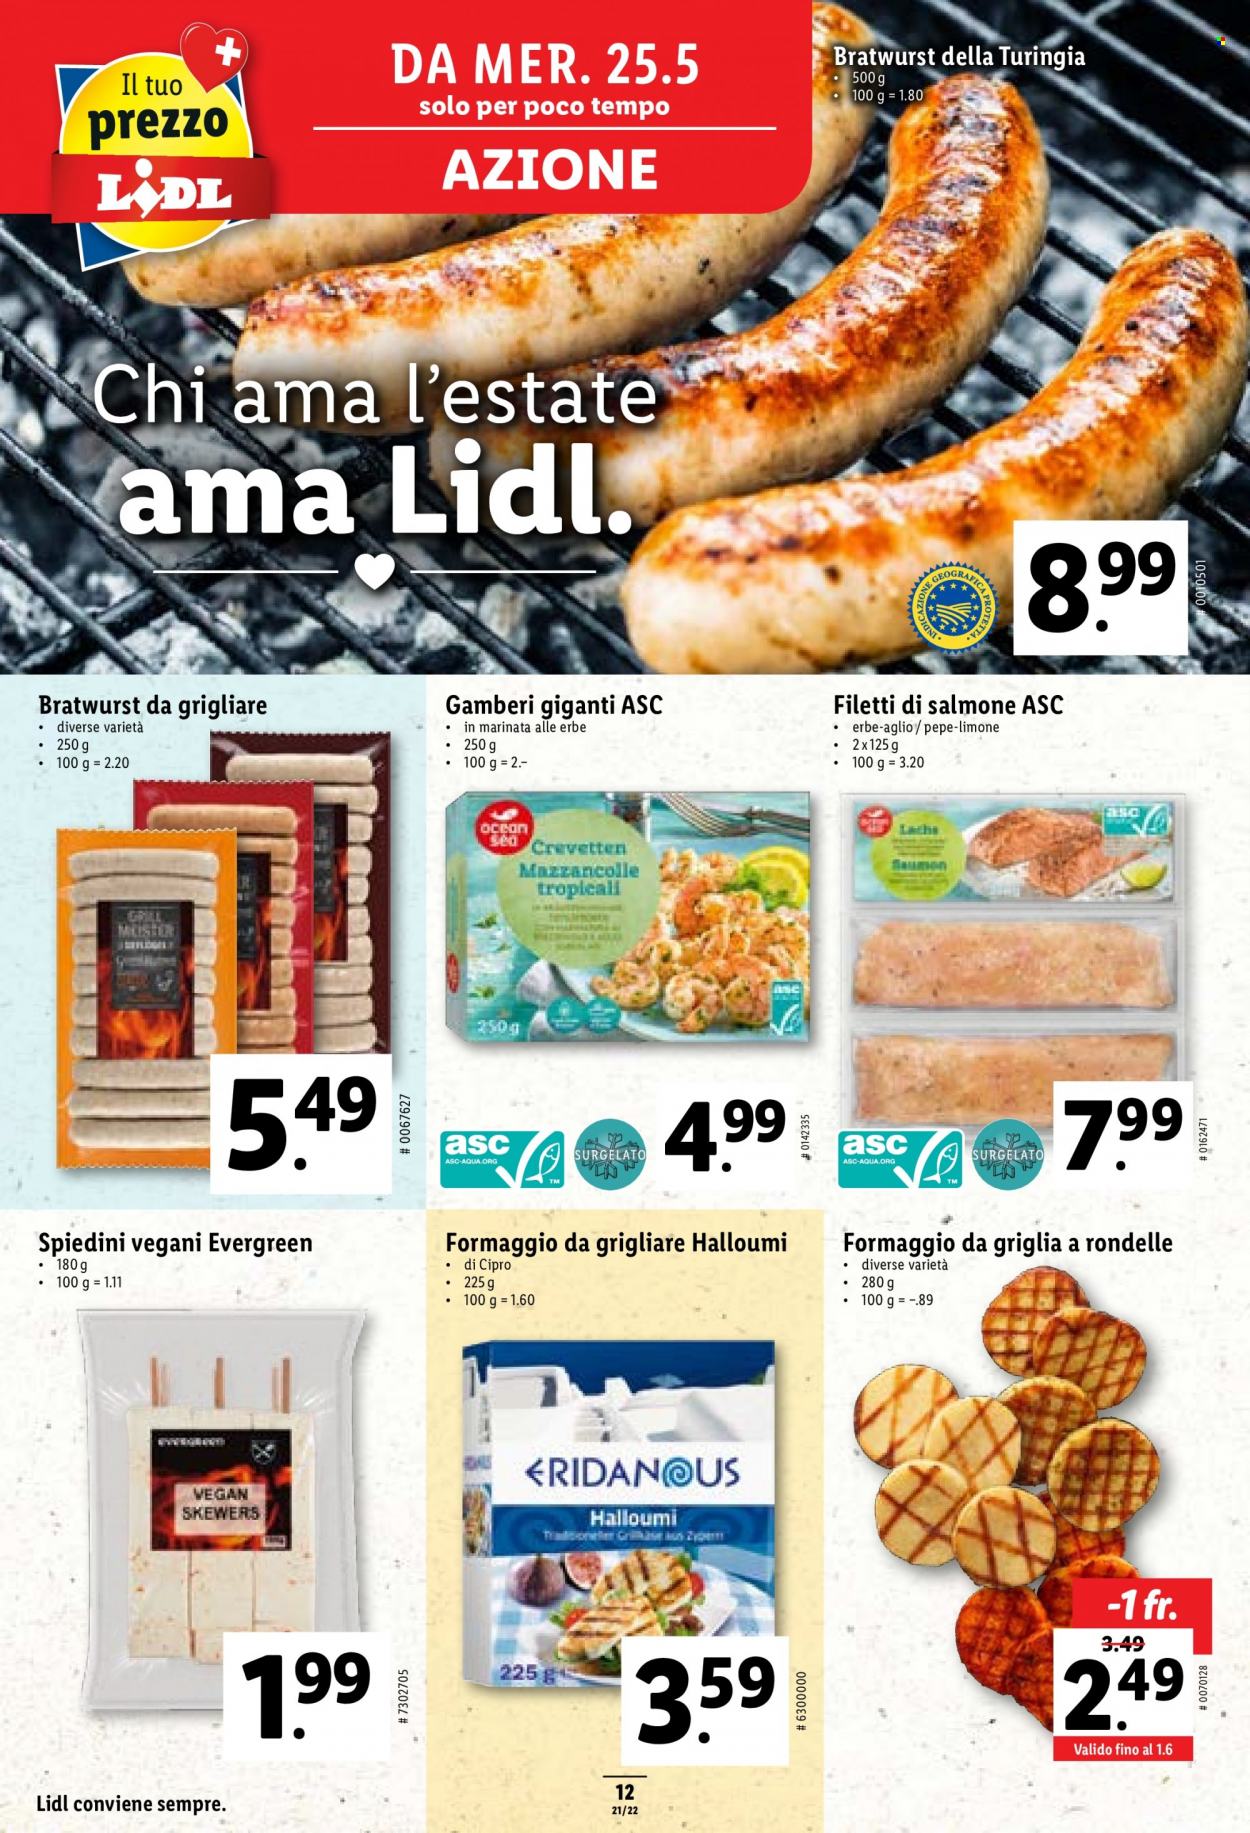 Catalogue Lidl - 25.5.2022 - 1.6.2022. Page 12.